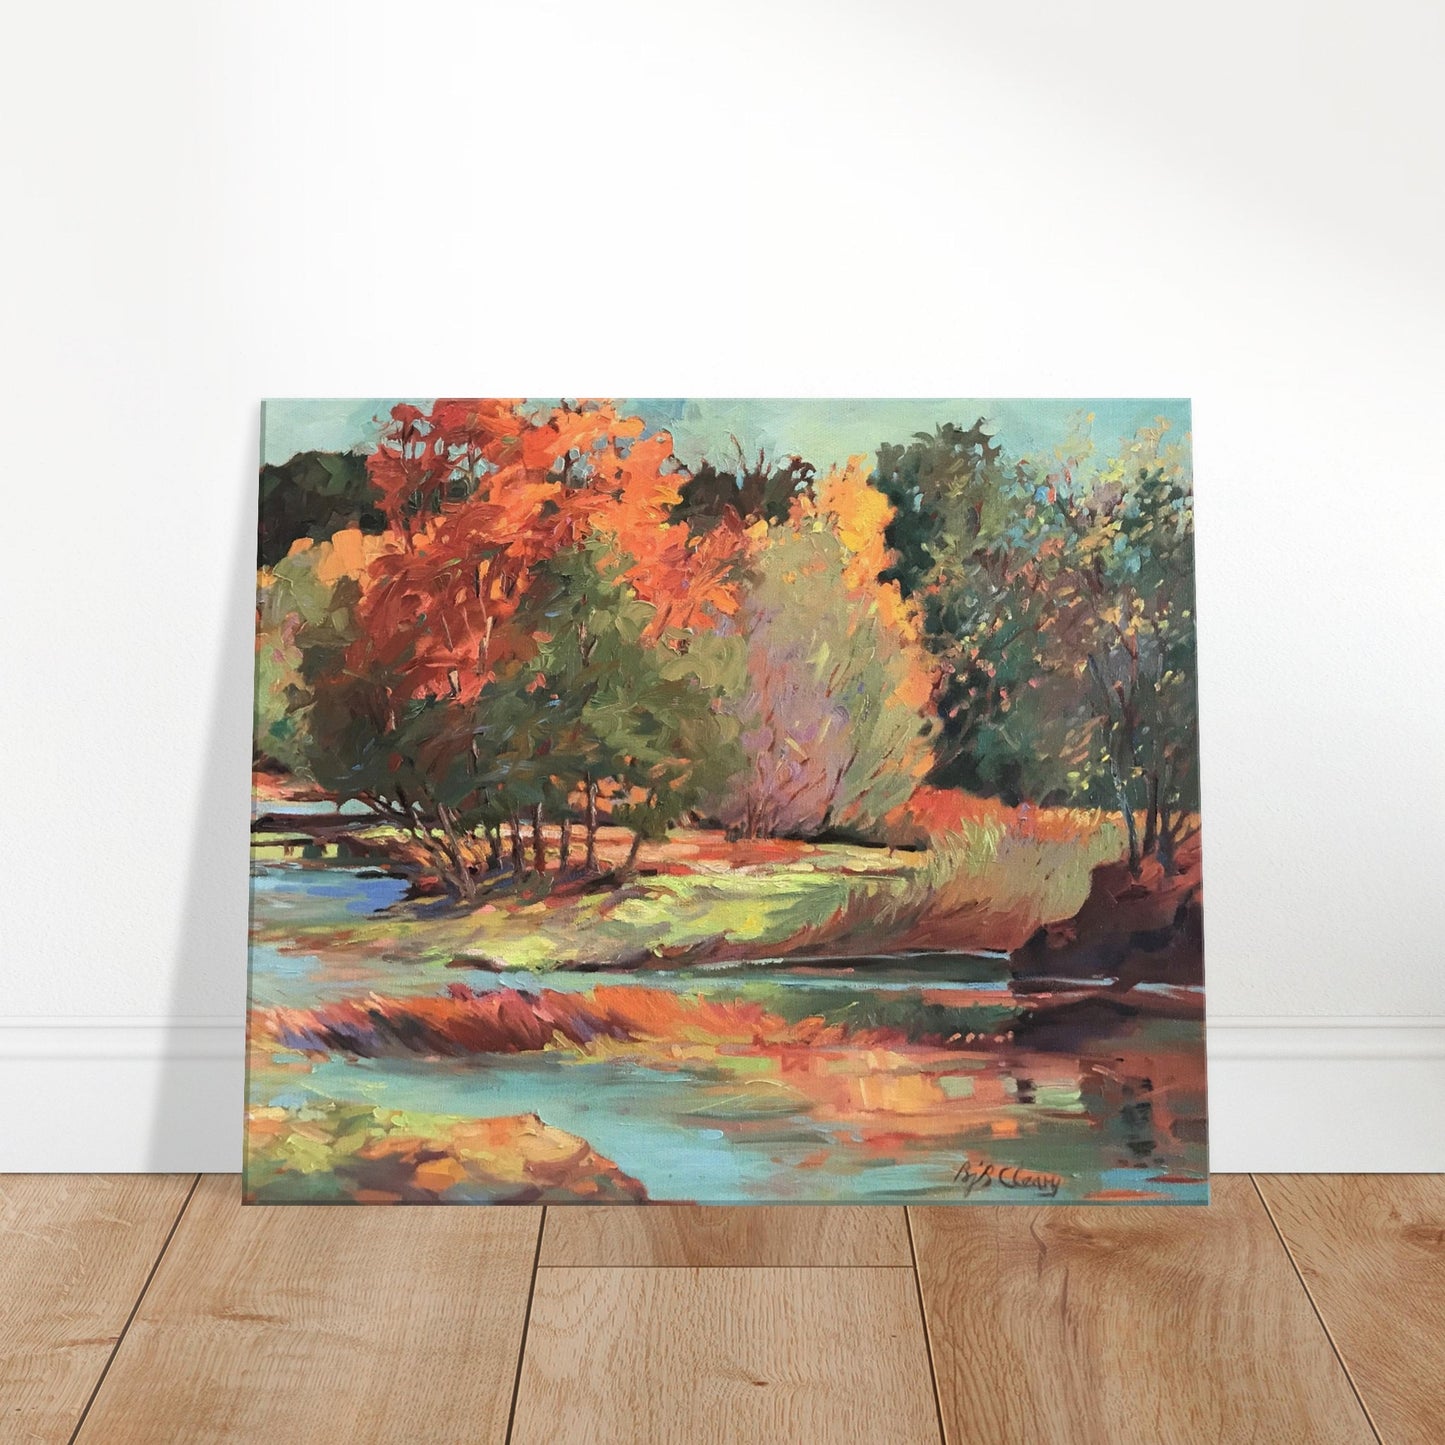 "Along the Illinois" Art Print on 20x24 inch Canvas by Barbara Cleary Designs